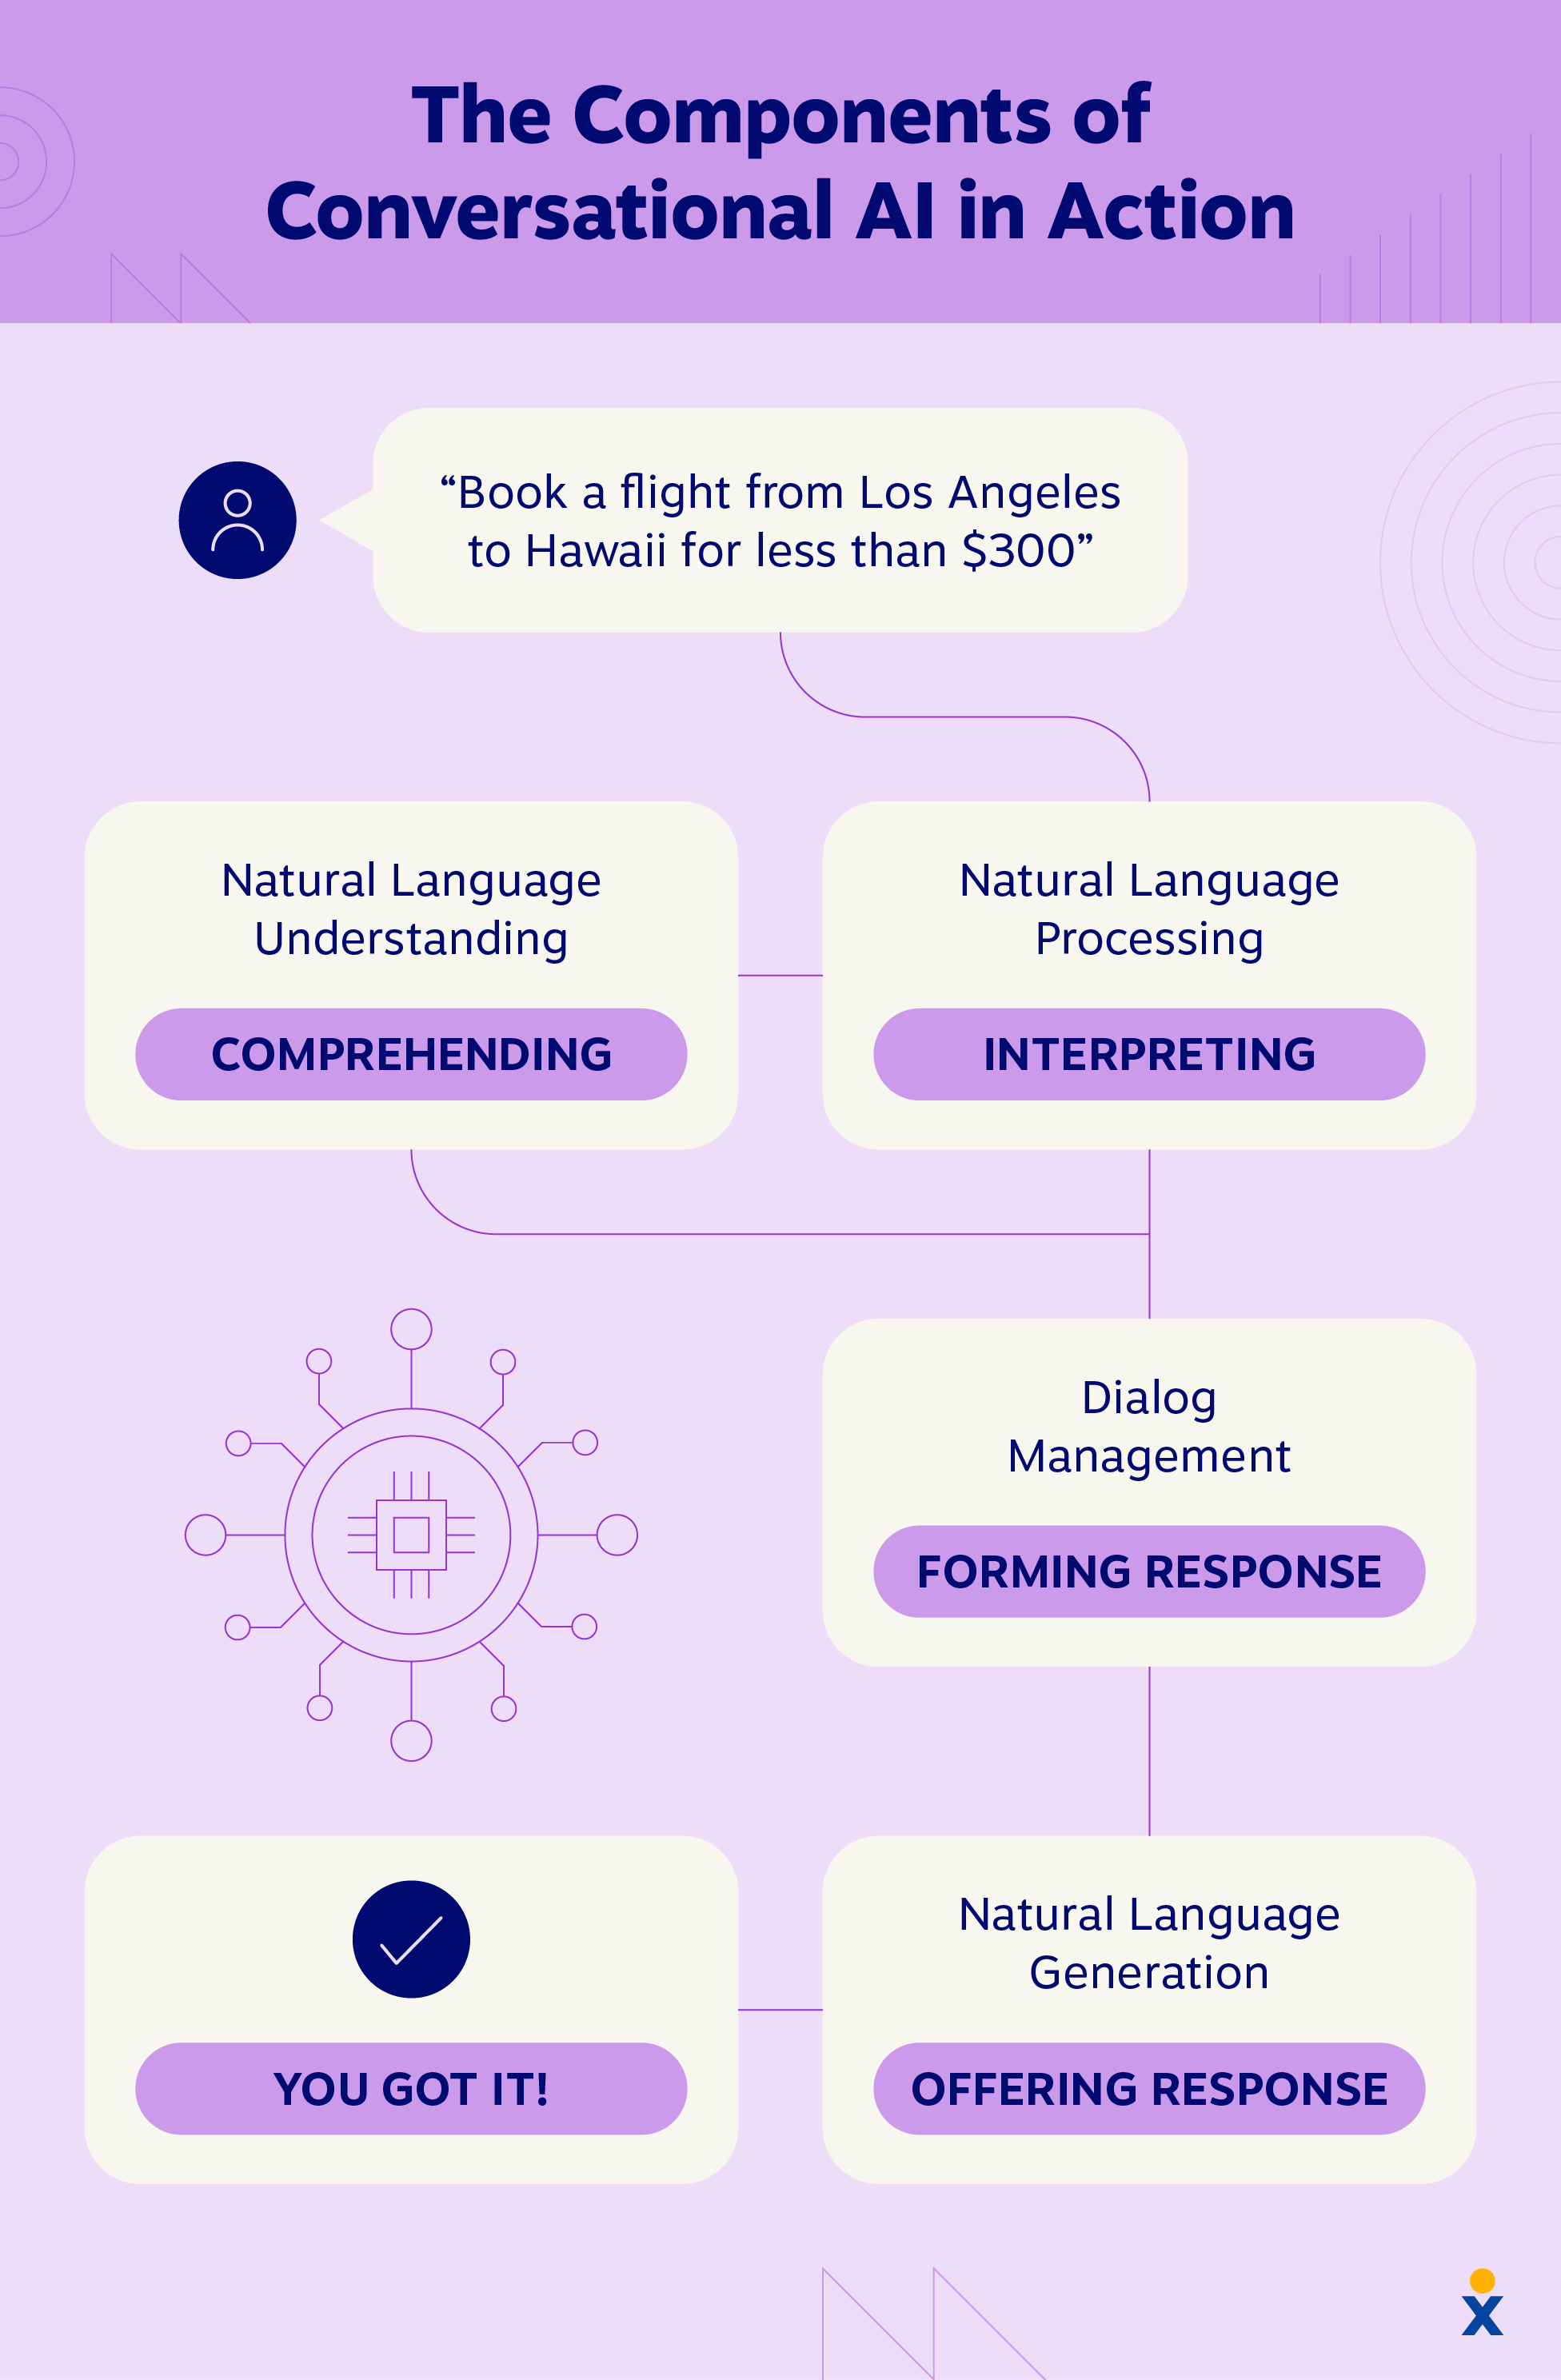 Graphic showing the components of conversational AI in action.